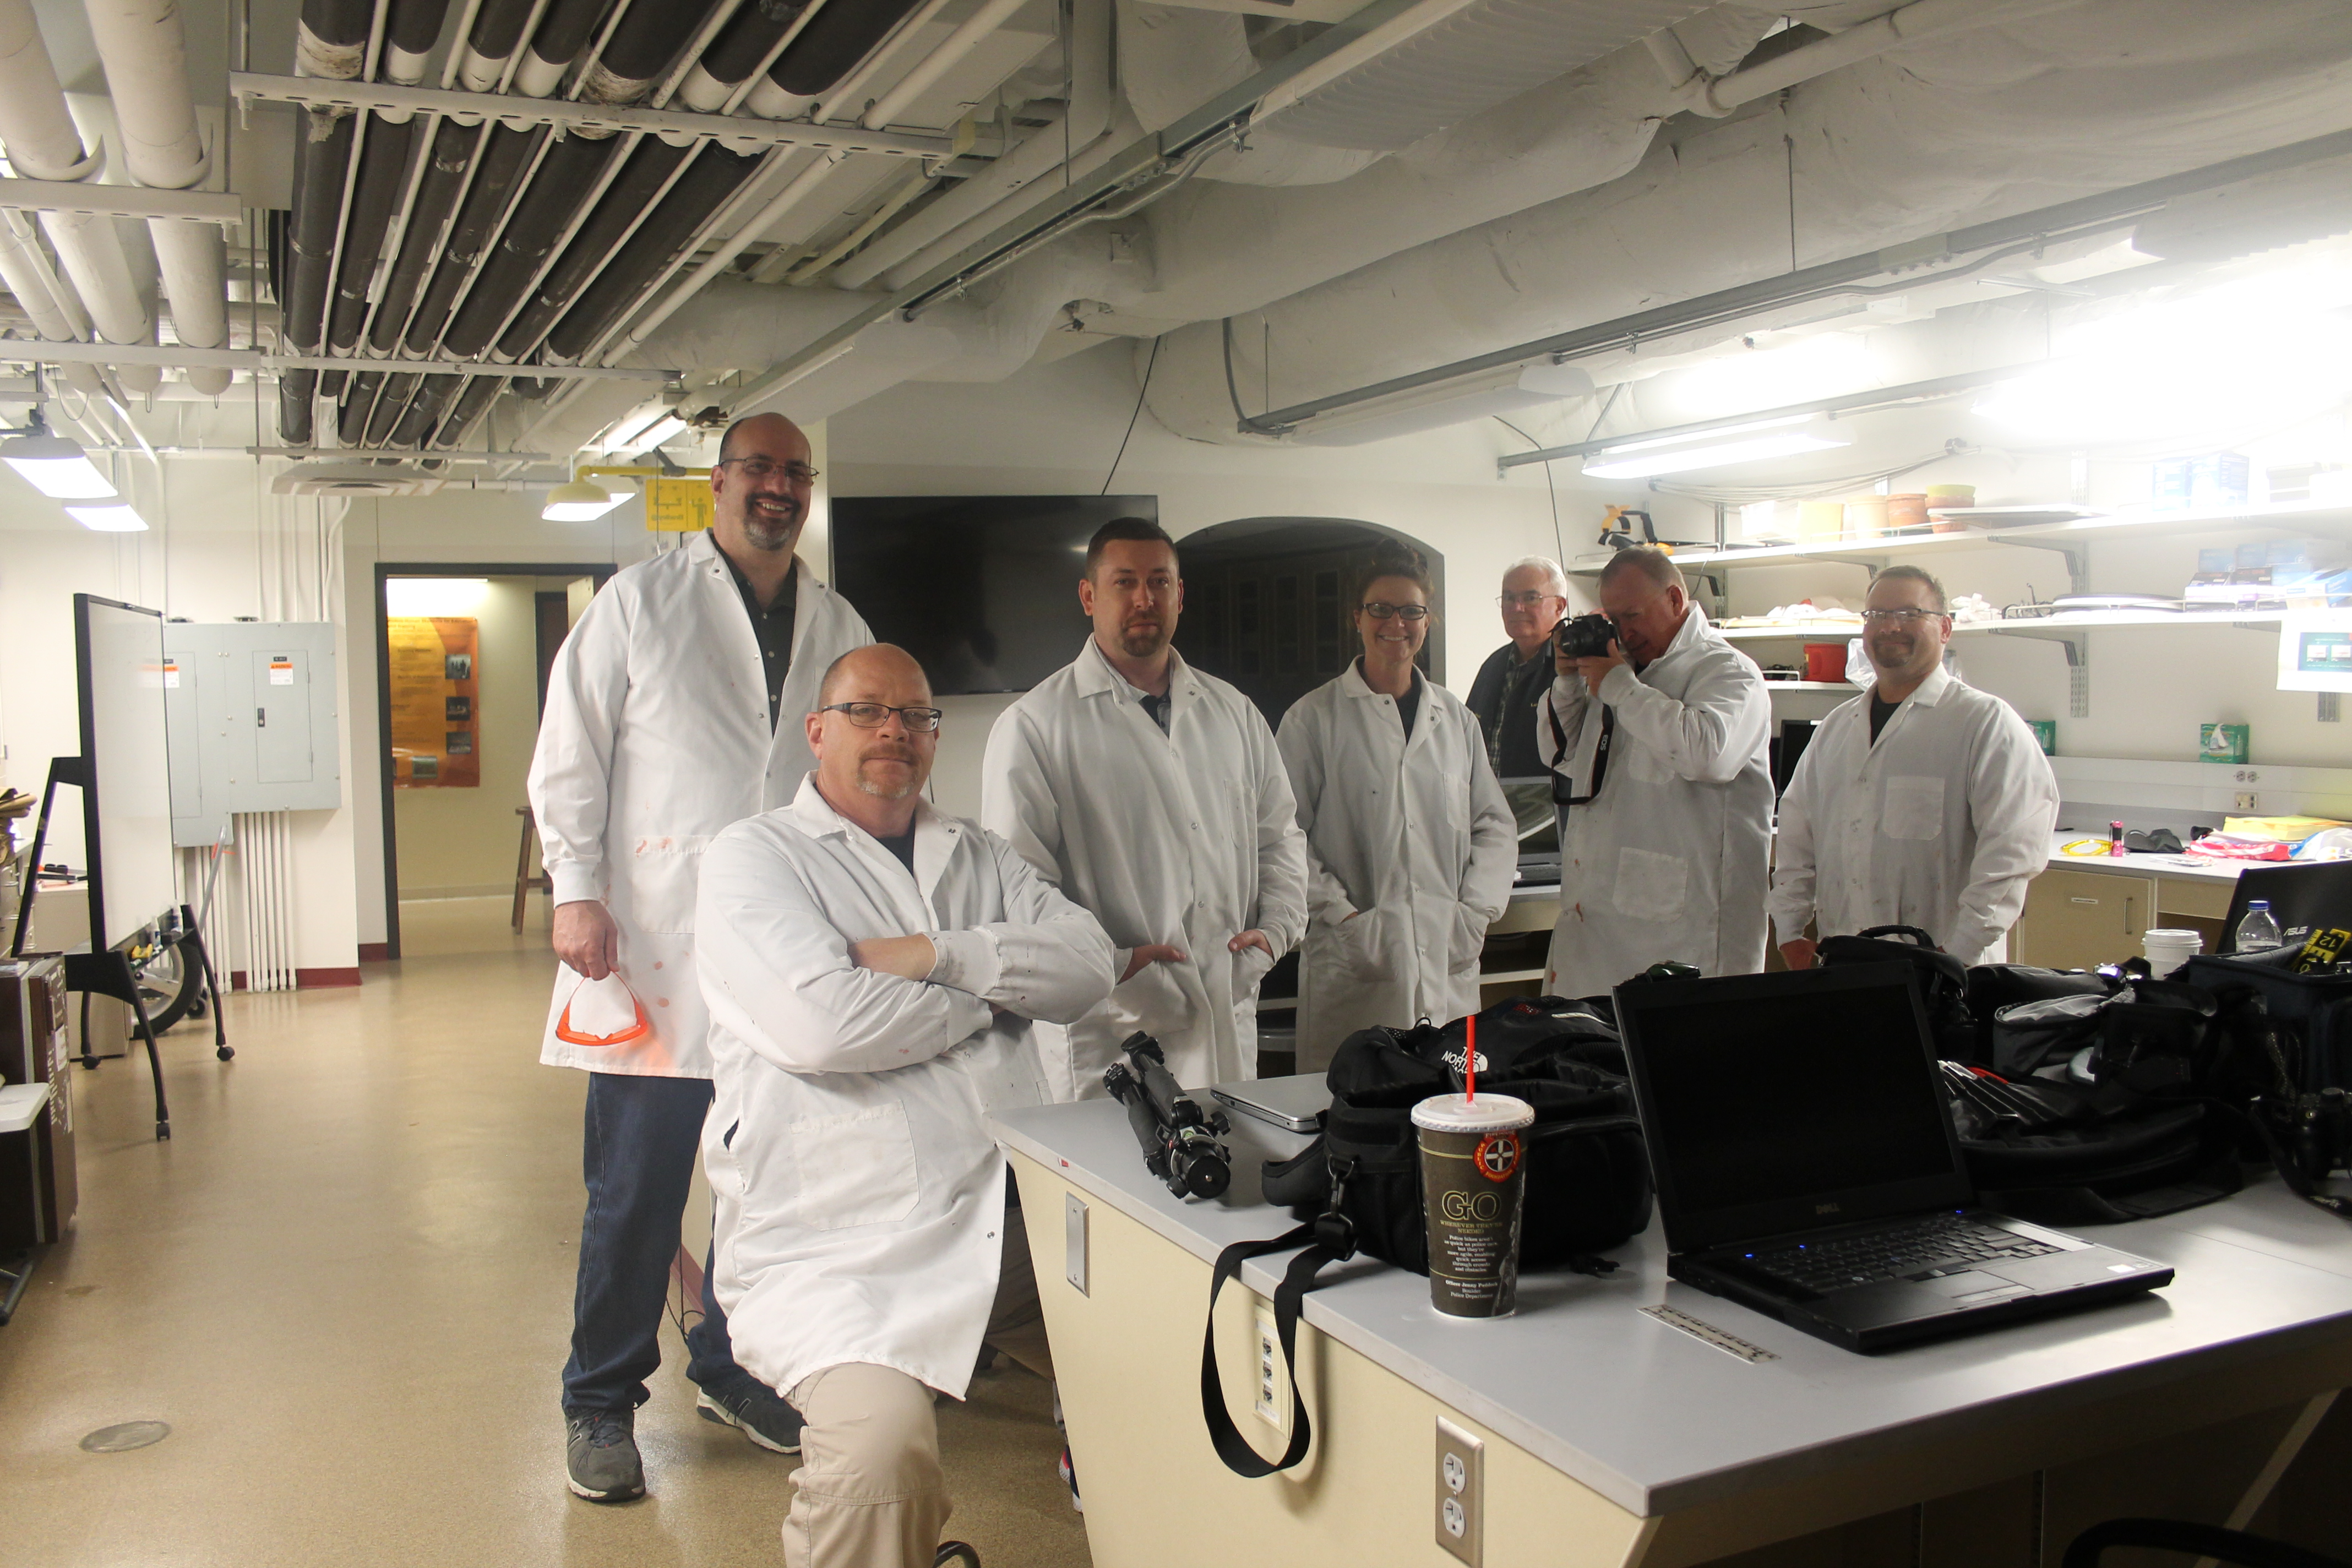 Professor Barksdale with his team in a lab